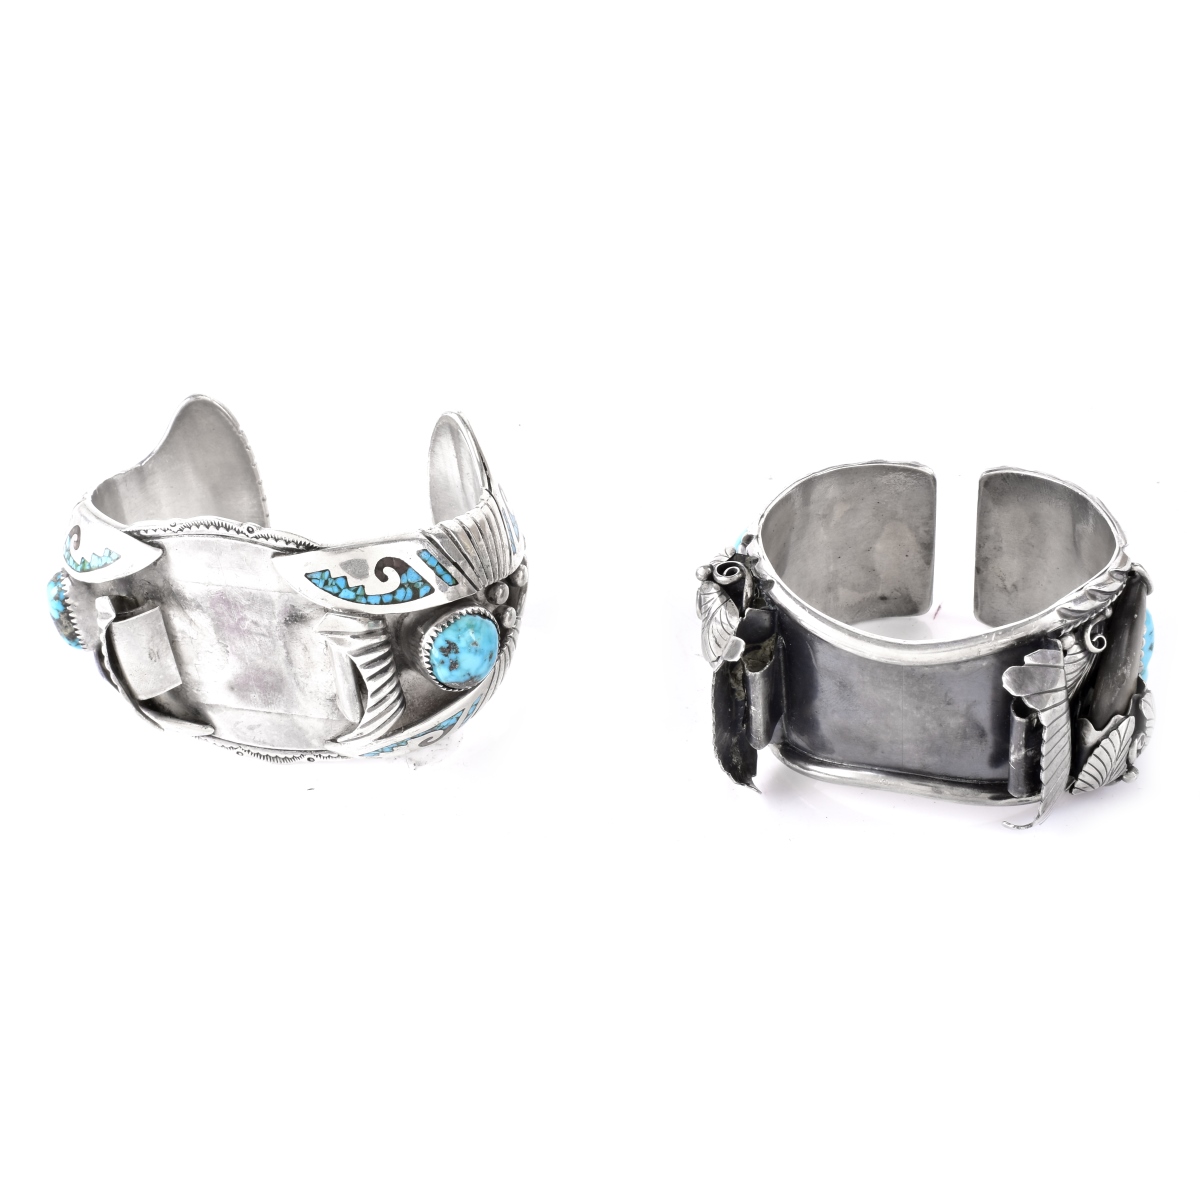 Two Silver and Turquoise Watch Bracelets